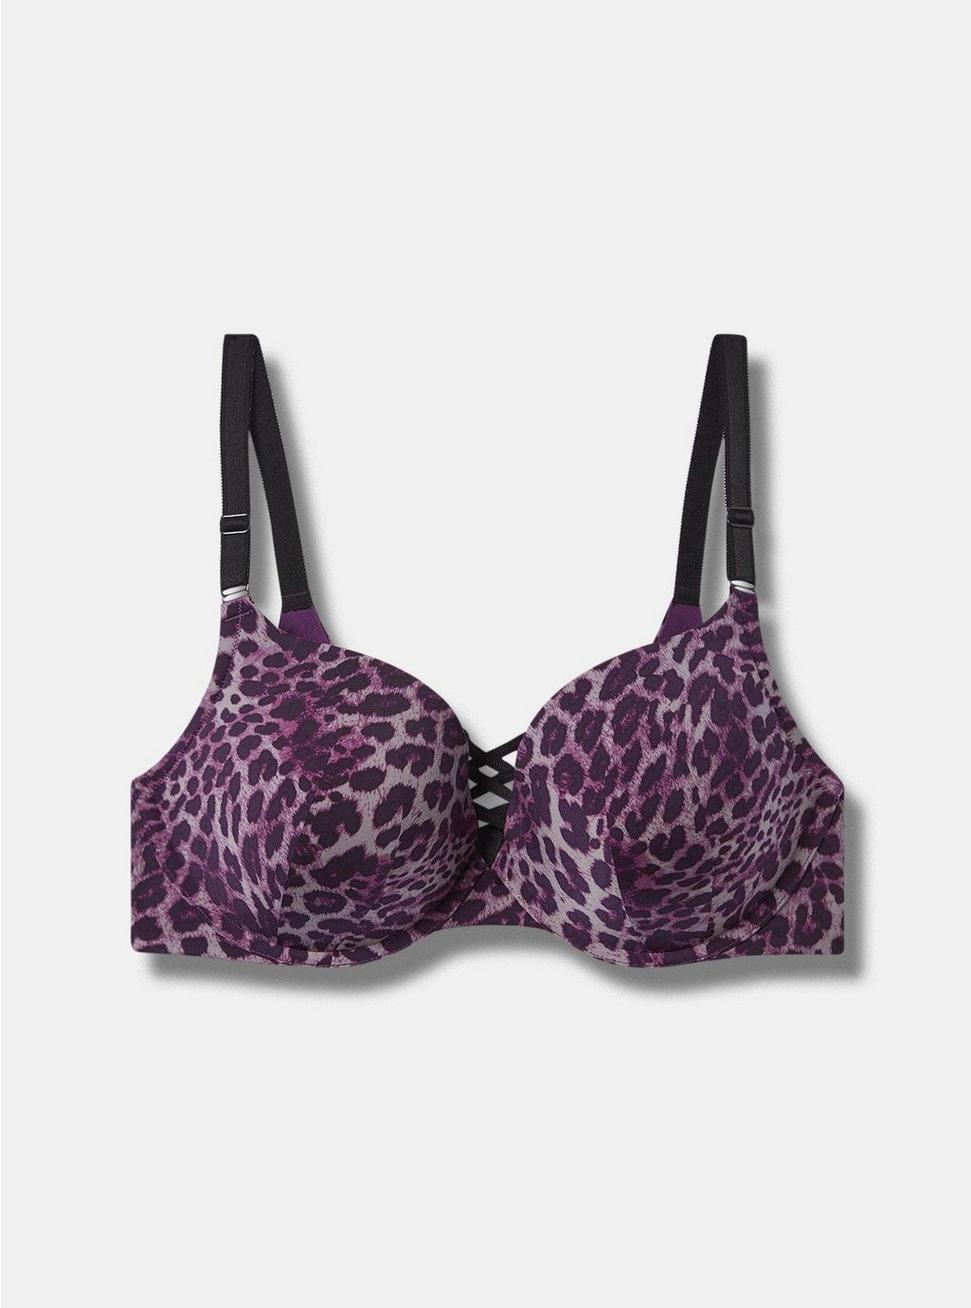 XO Plunge Smooth 360° Back Smoothing® Bra, CLASSIC LEOPARD GRAPE ROYALE, hi-res